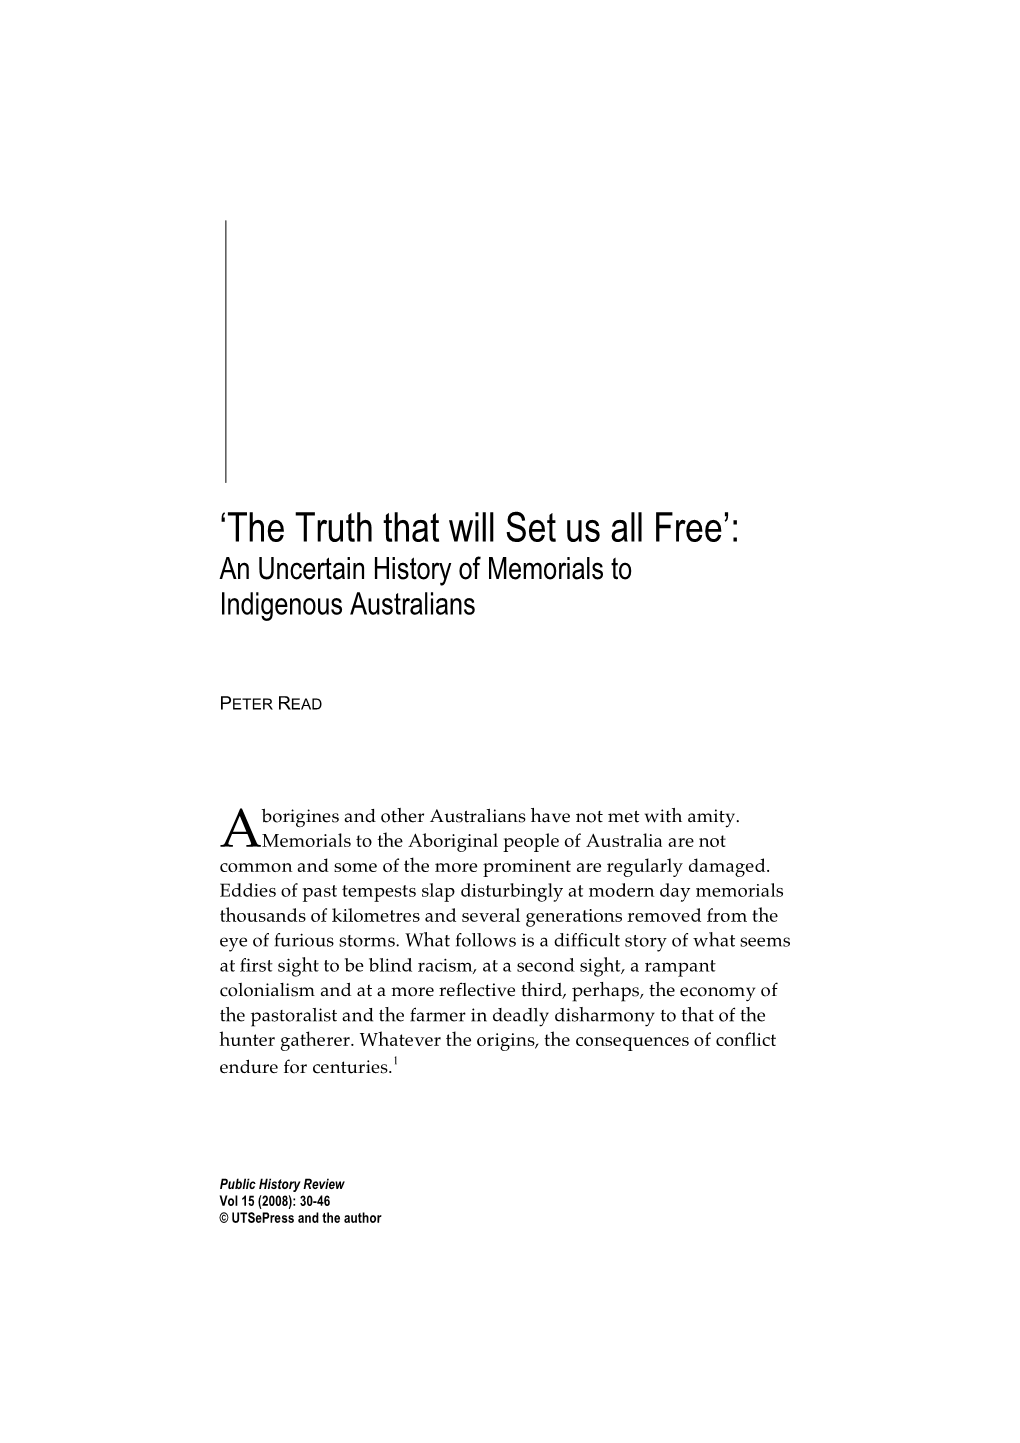 'The Truth That Will Set Us All Free'